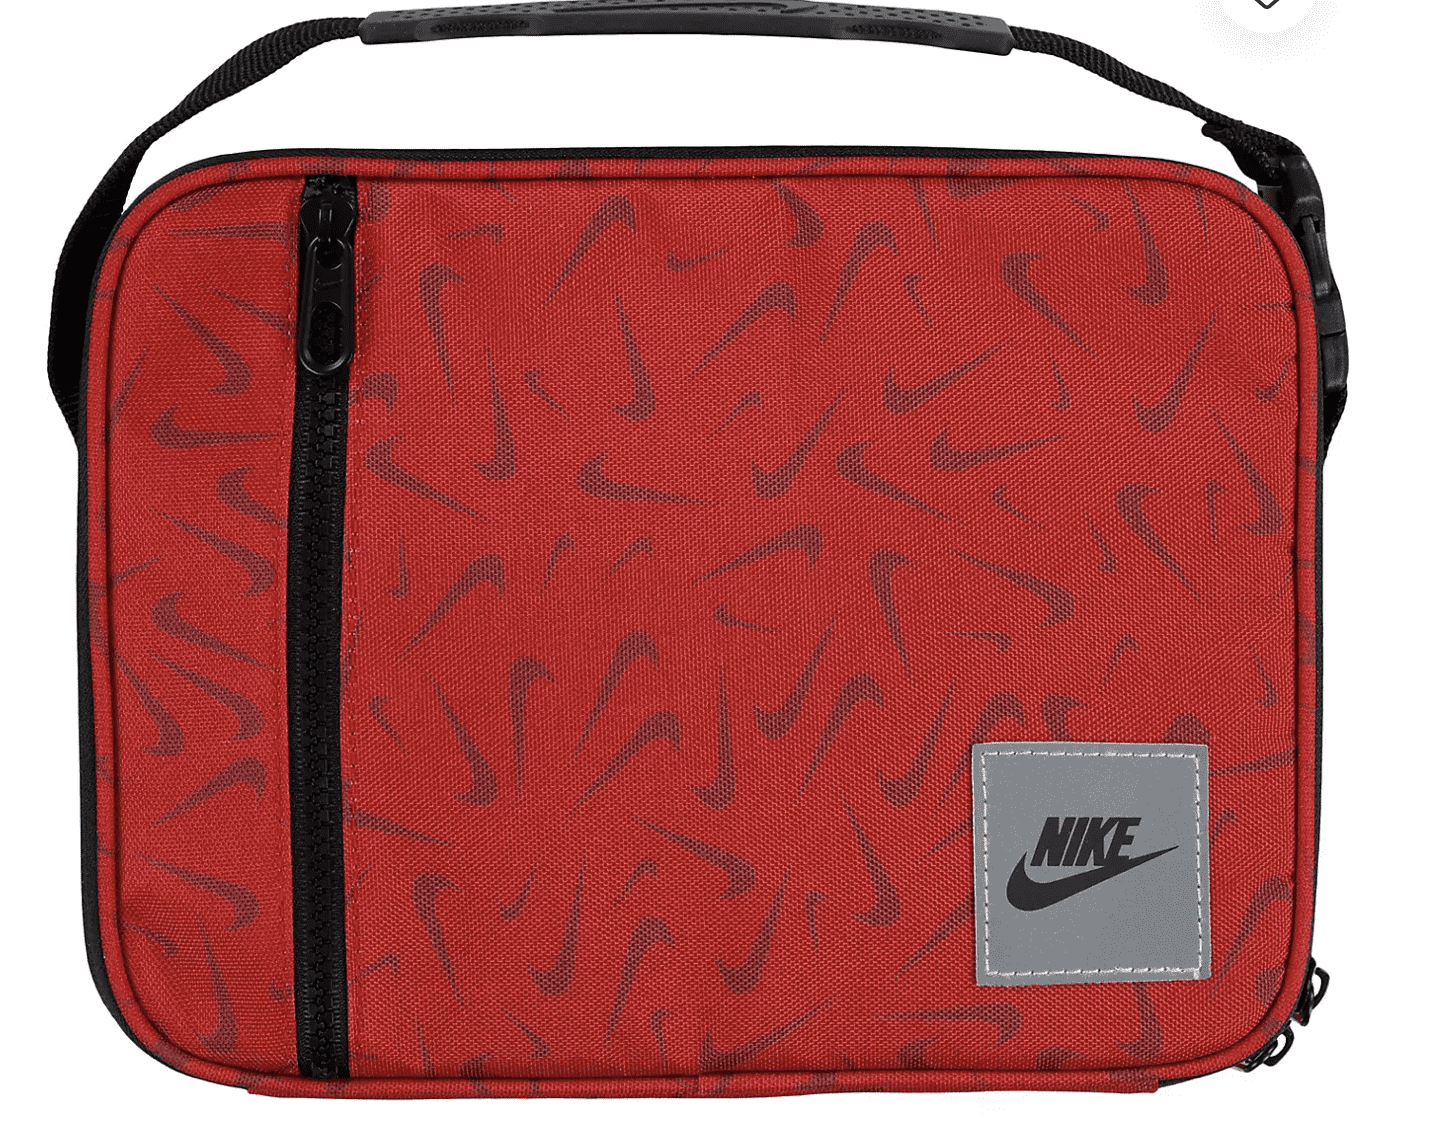 Nike Fuel Pack Lunch Box Hard Shell Red Black With Big Swoosh Logo